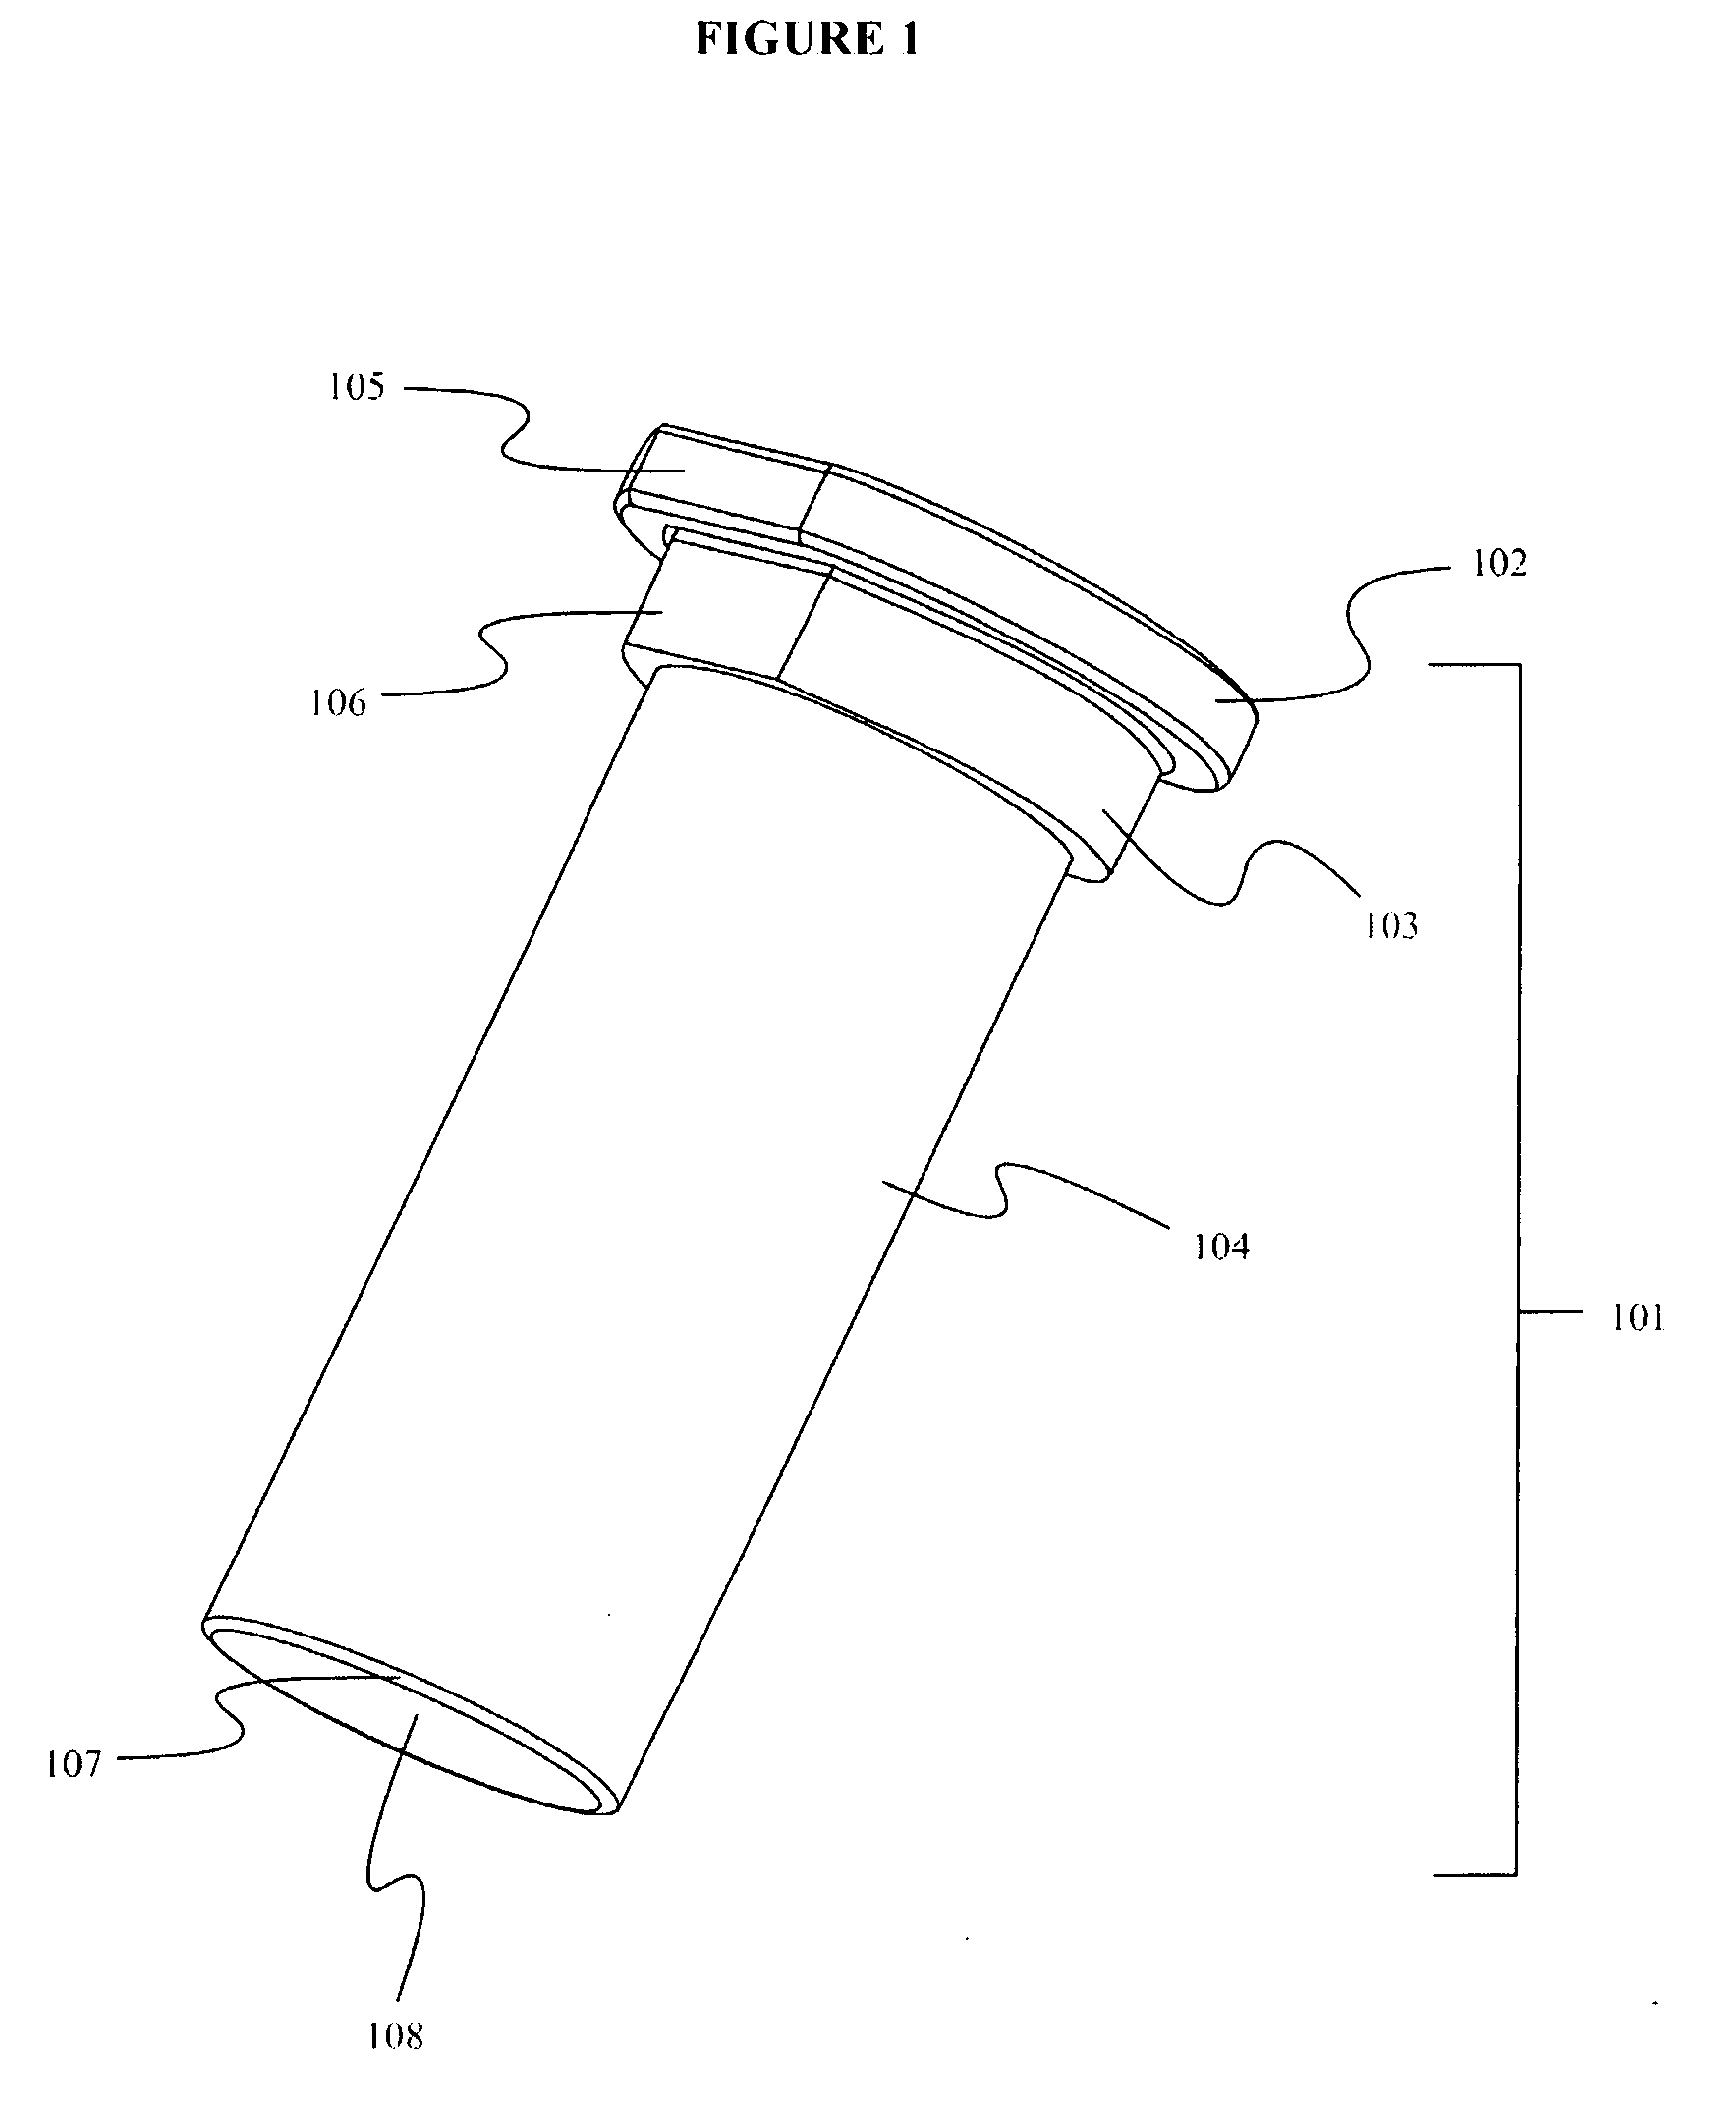 Method and apparatus for aperture fixation by securing flexible material with a knotless fixation device